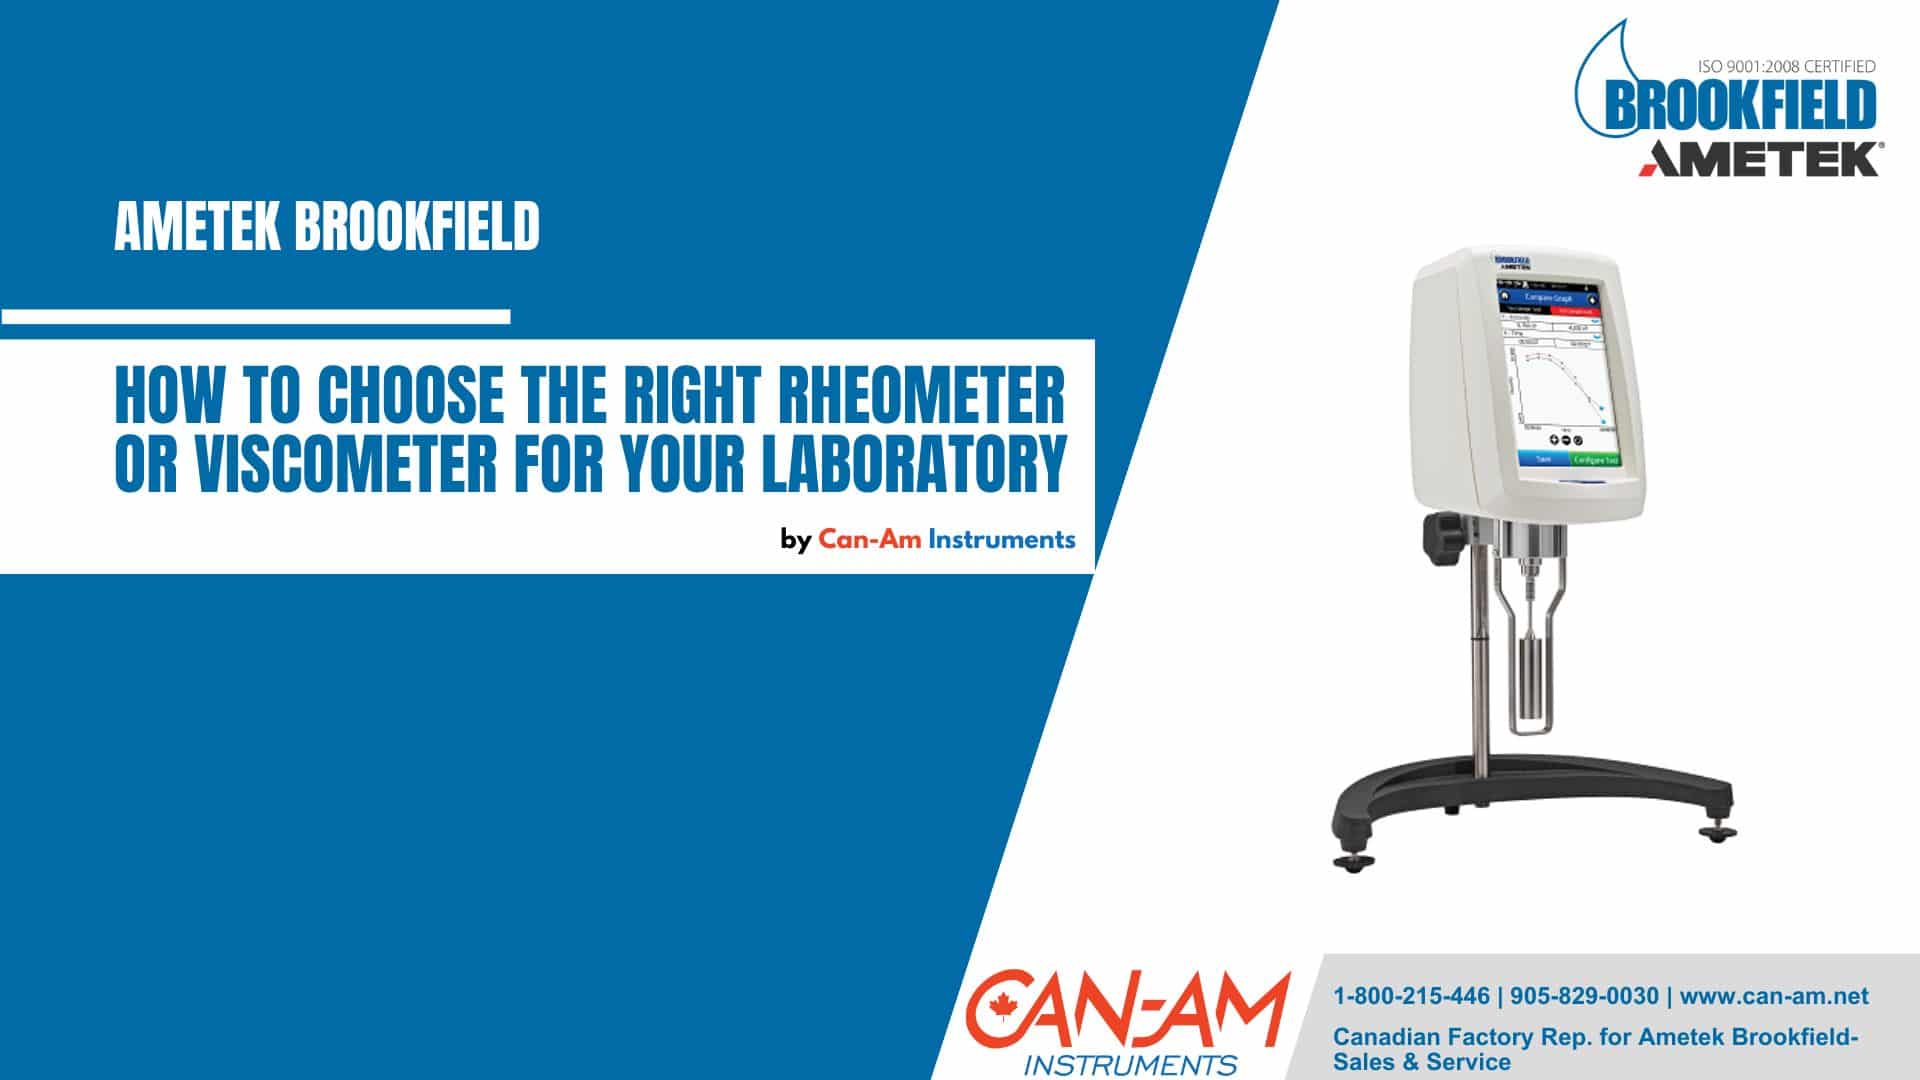 How To Choose The Perfect Rheometer Or Viscometer For Your Laboratory: A Comprehensive Guide Image